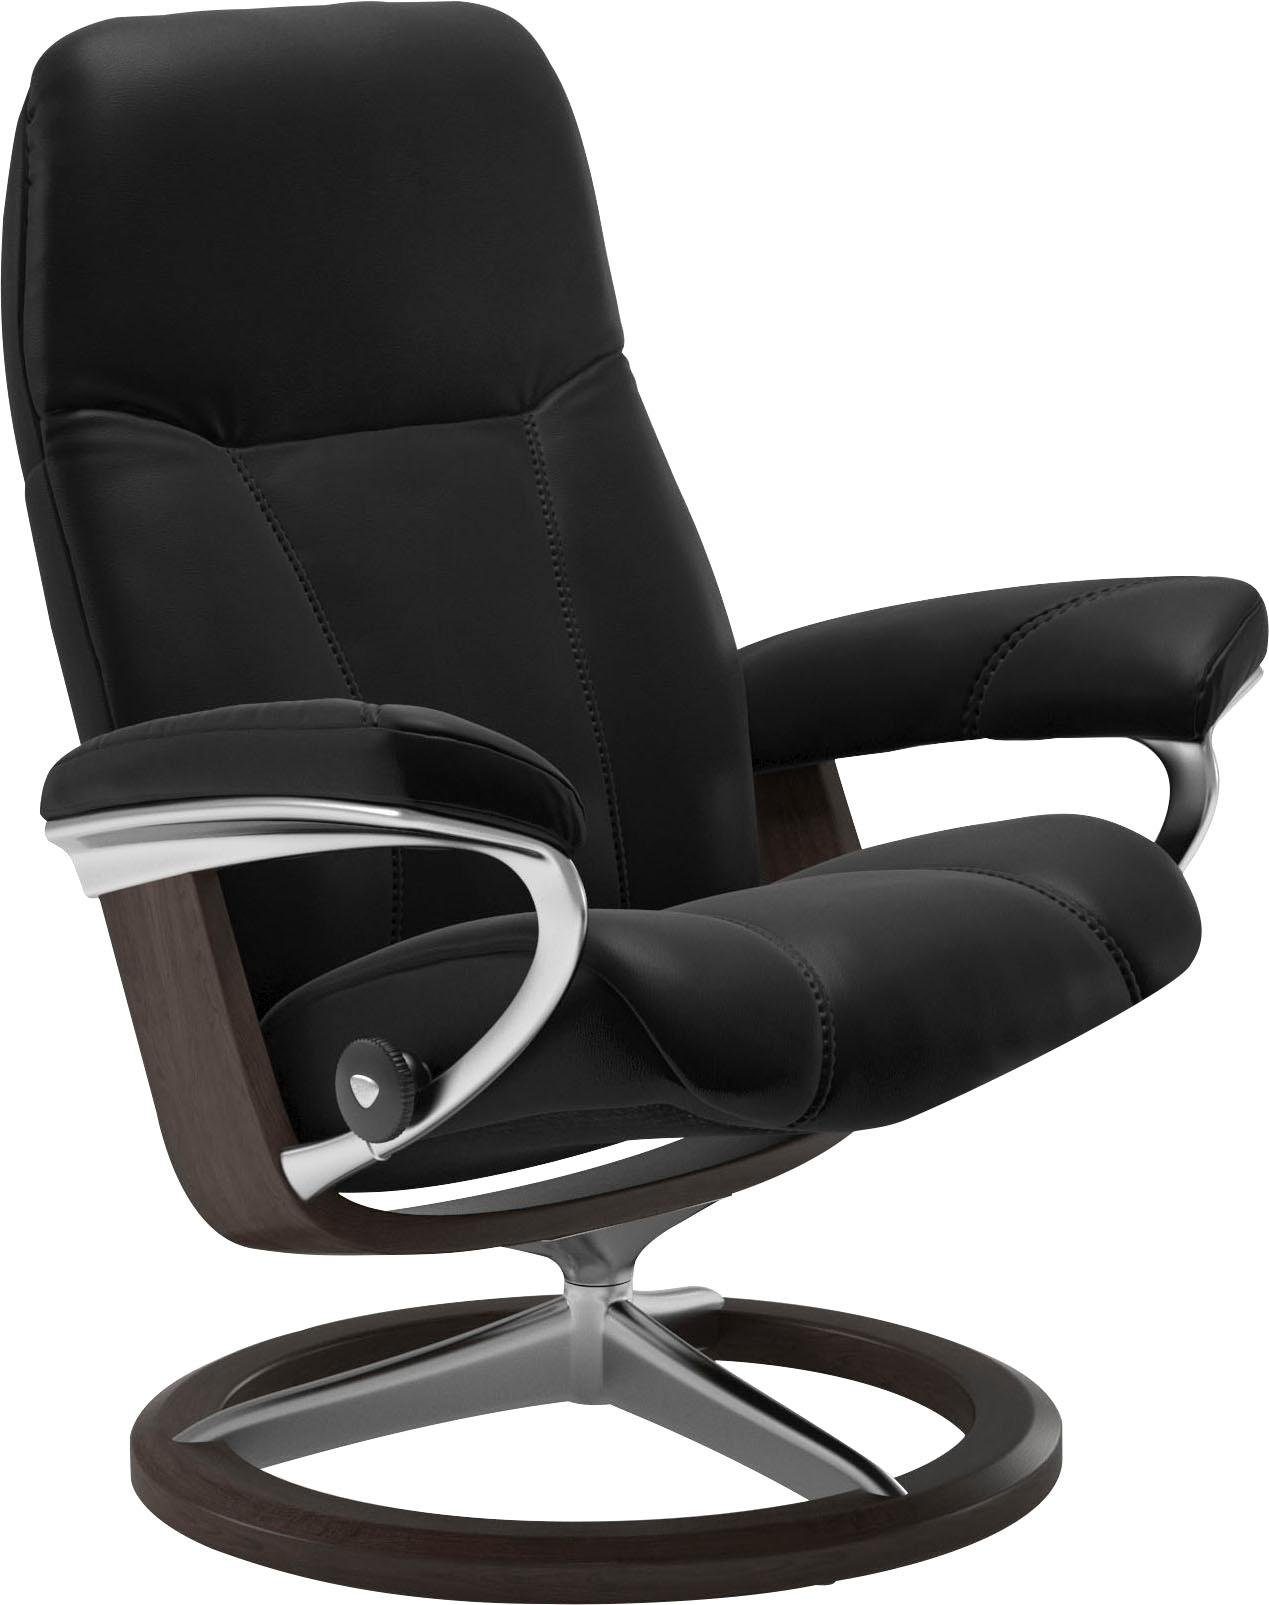 Stressless® Relaxsessel Signature Consul, L, Gestell mit Base, Wenge Größe